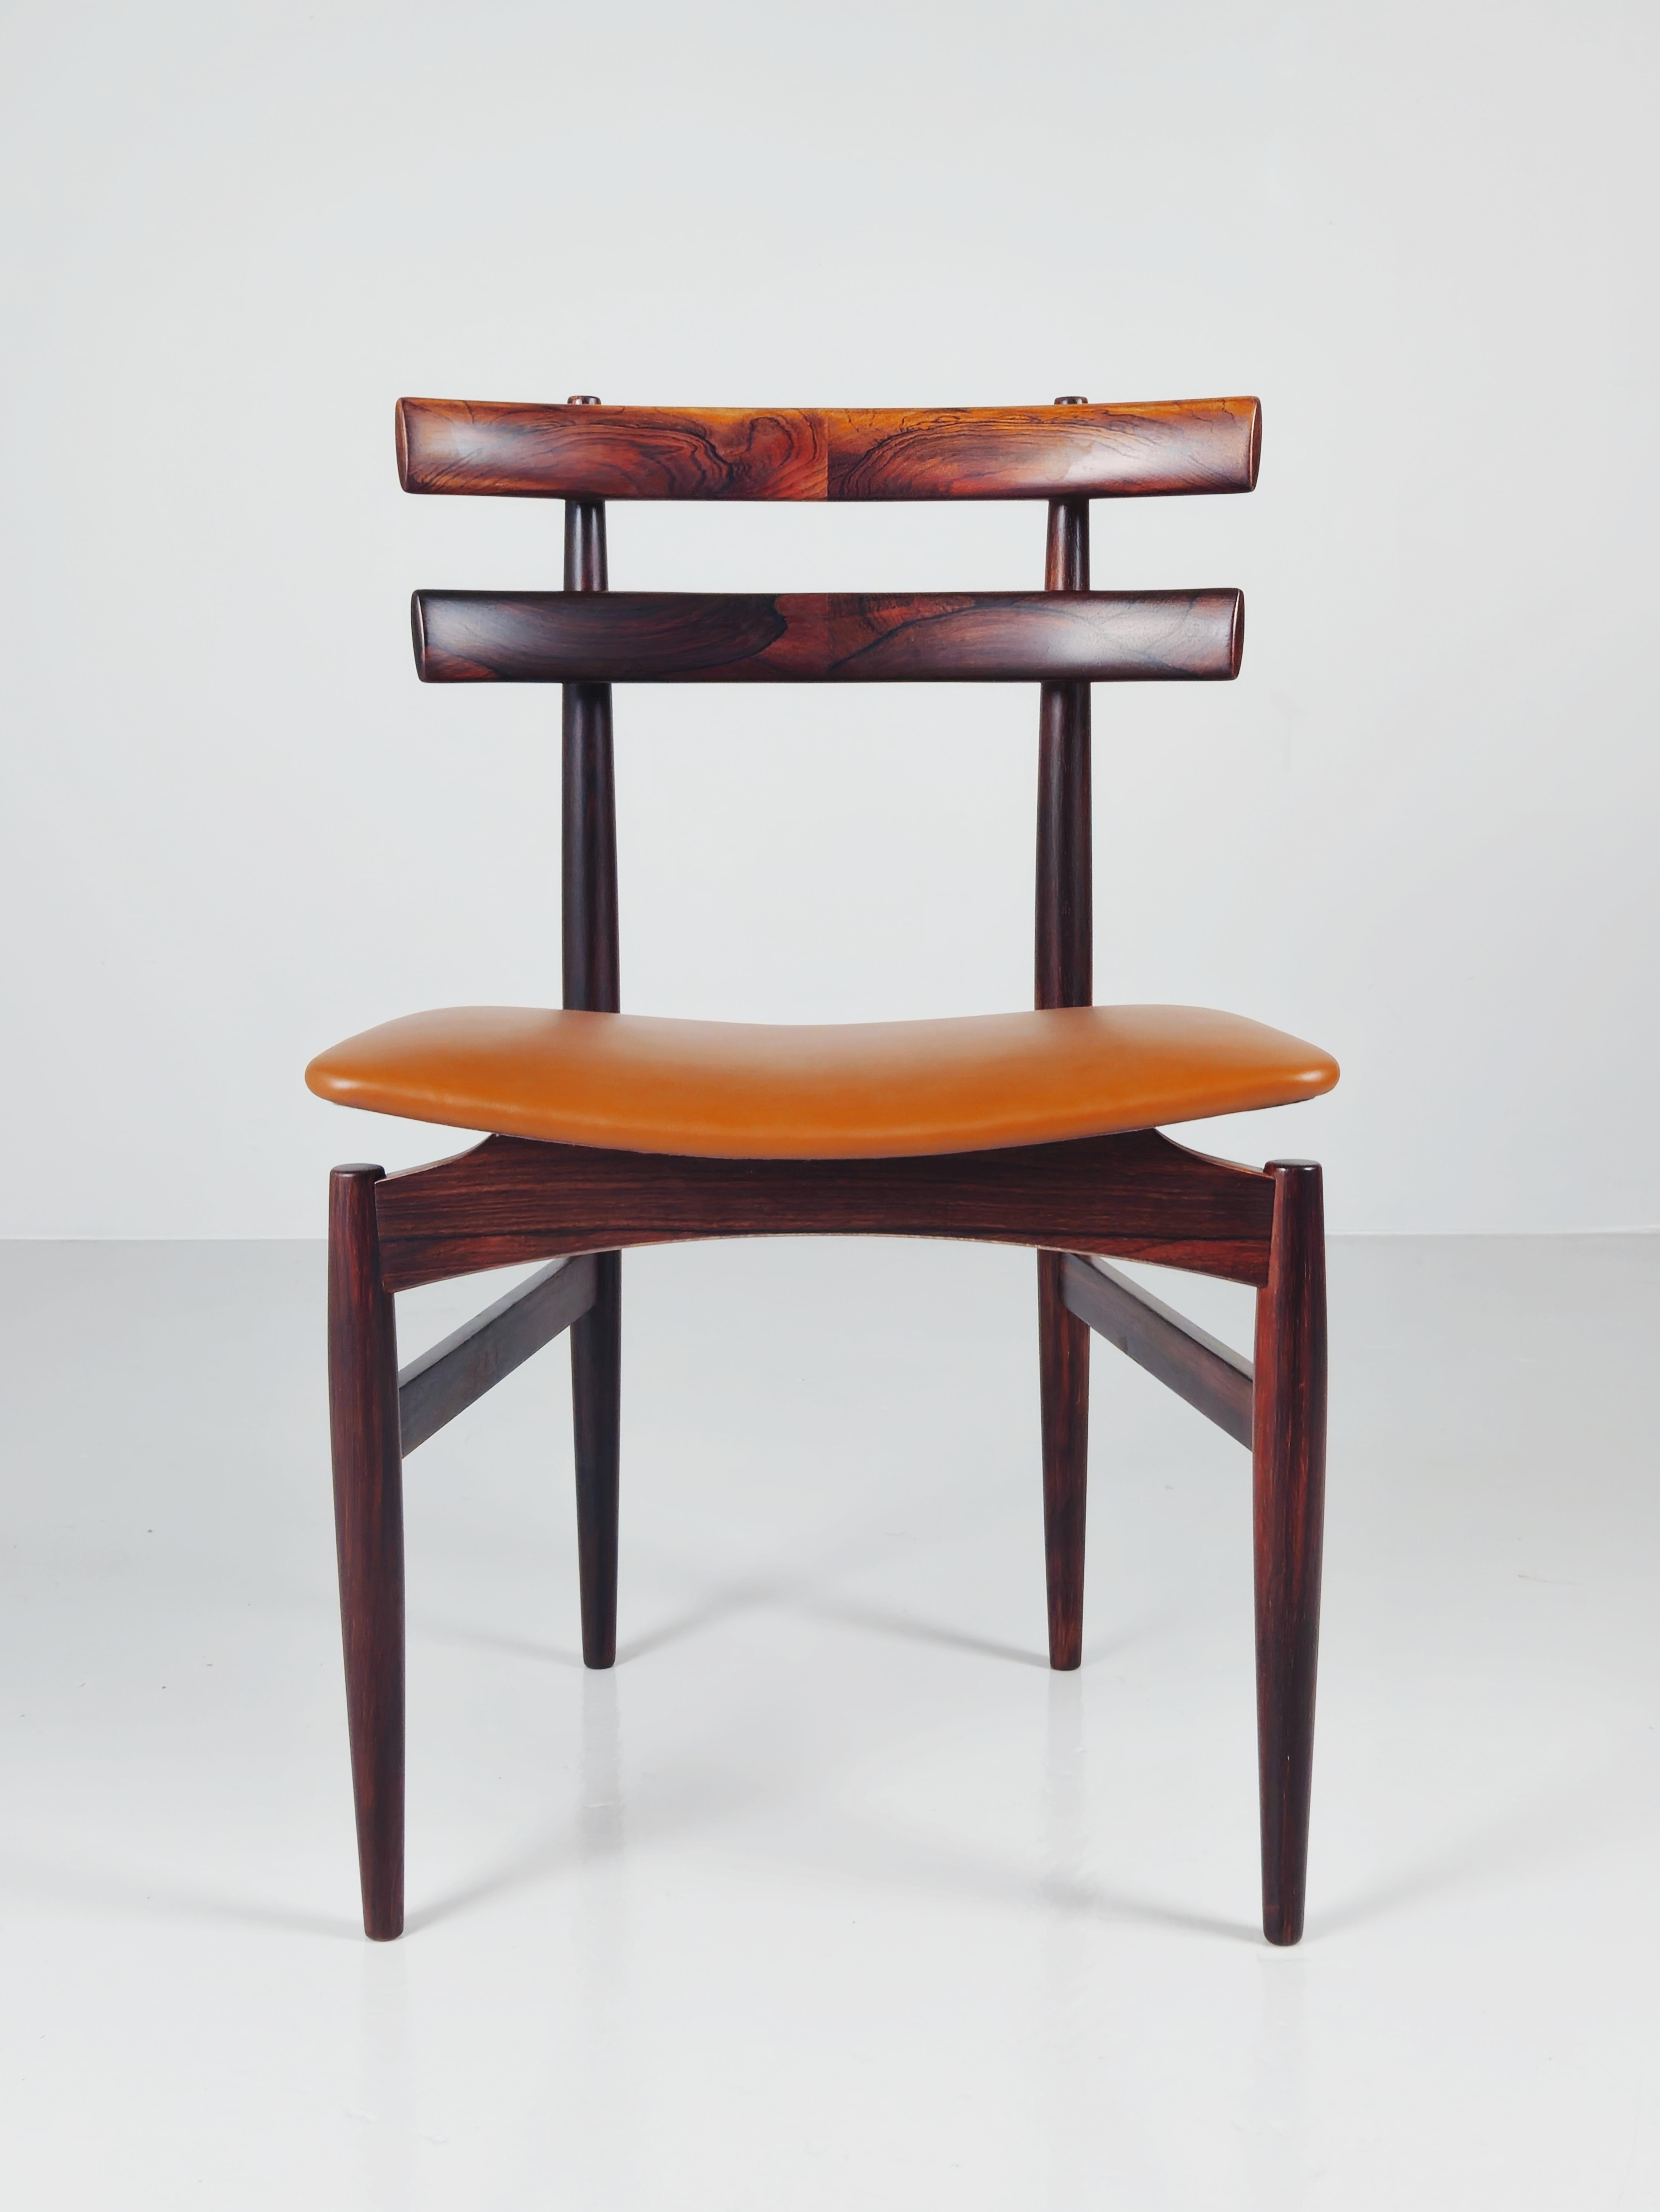 Leather Rare rosewood chair 'Model 30' by Poul Hundevad, Denmark, 1950s For Sale